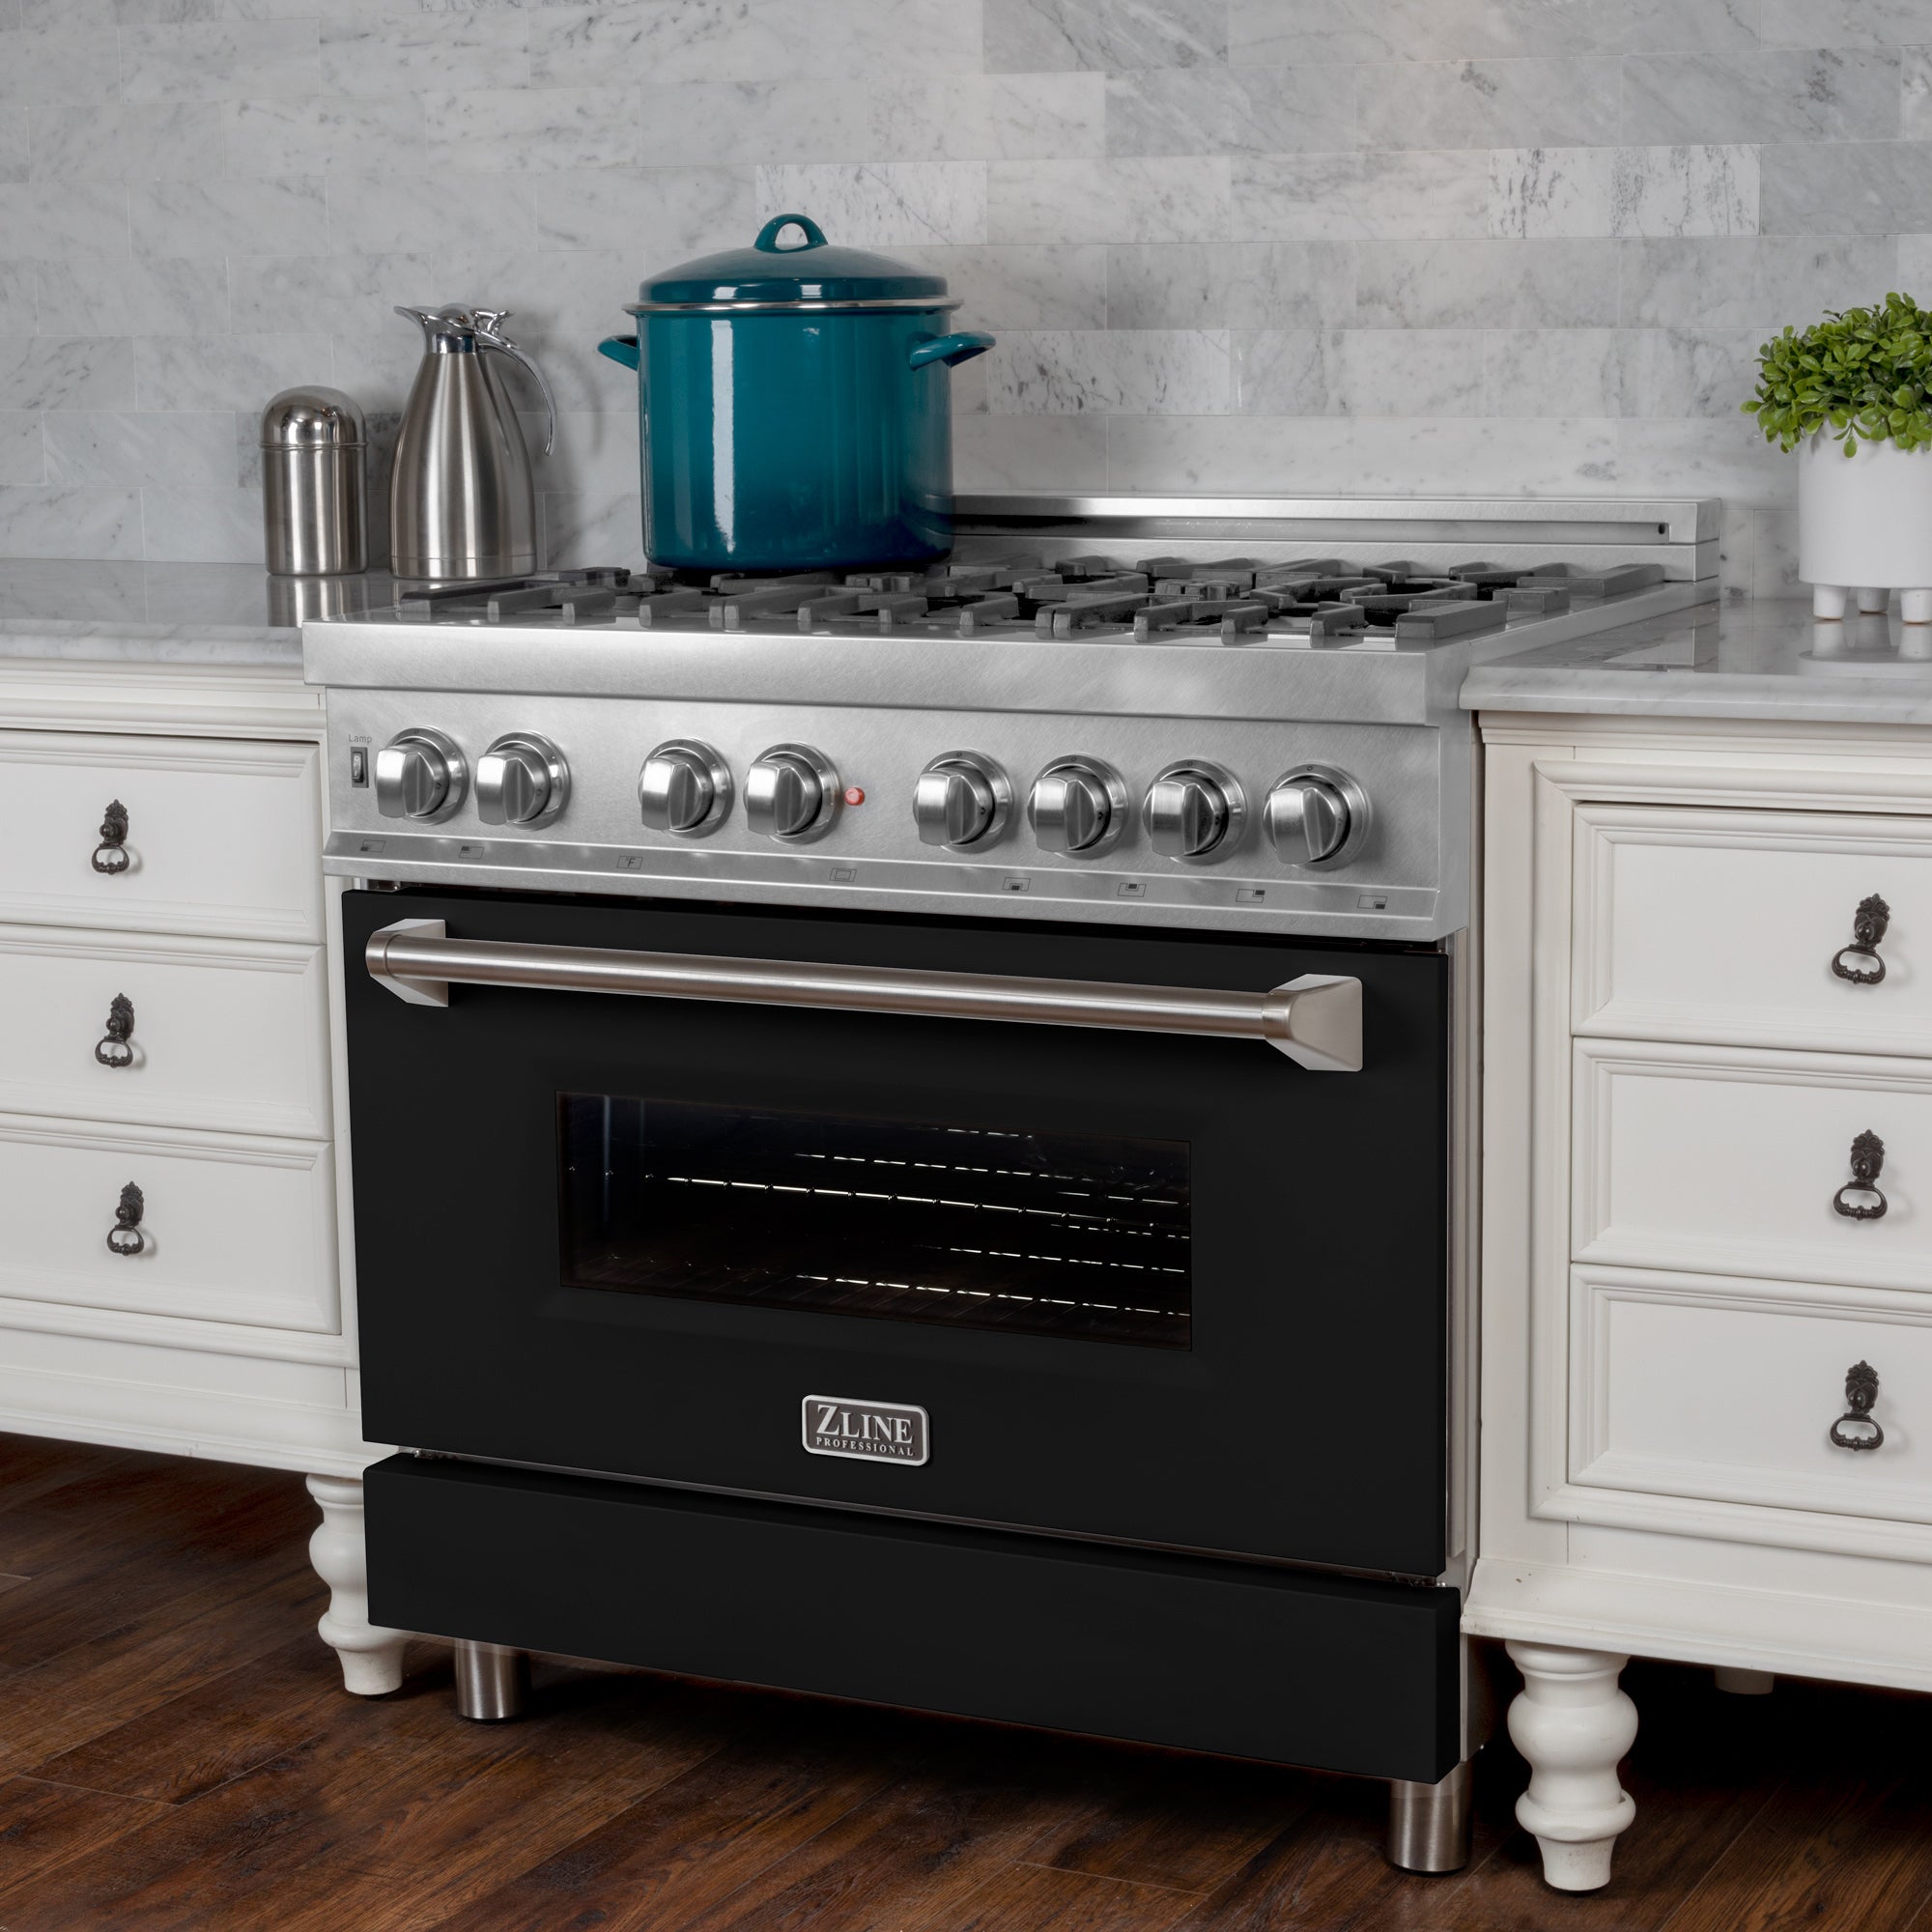 ZLINE 24" 2.8 cu. ft. Dual Fuel Range with Gas Stove and Electric Oven in Fingerprint Resistant Stainless Steel and Black Matte Door (RAS-BLM-24)